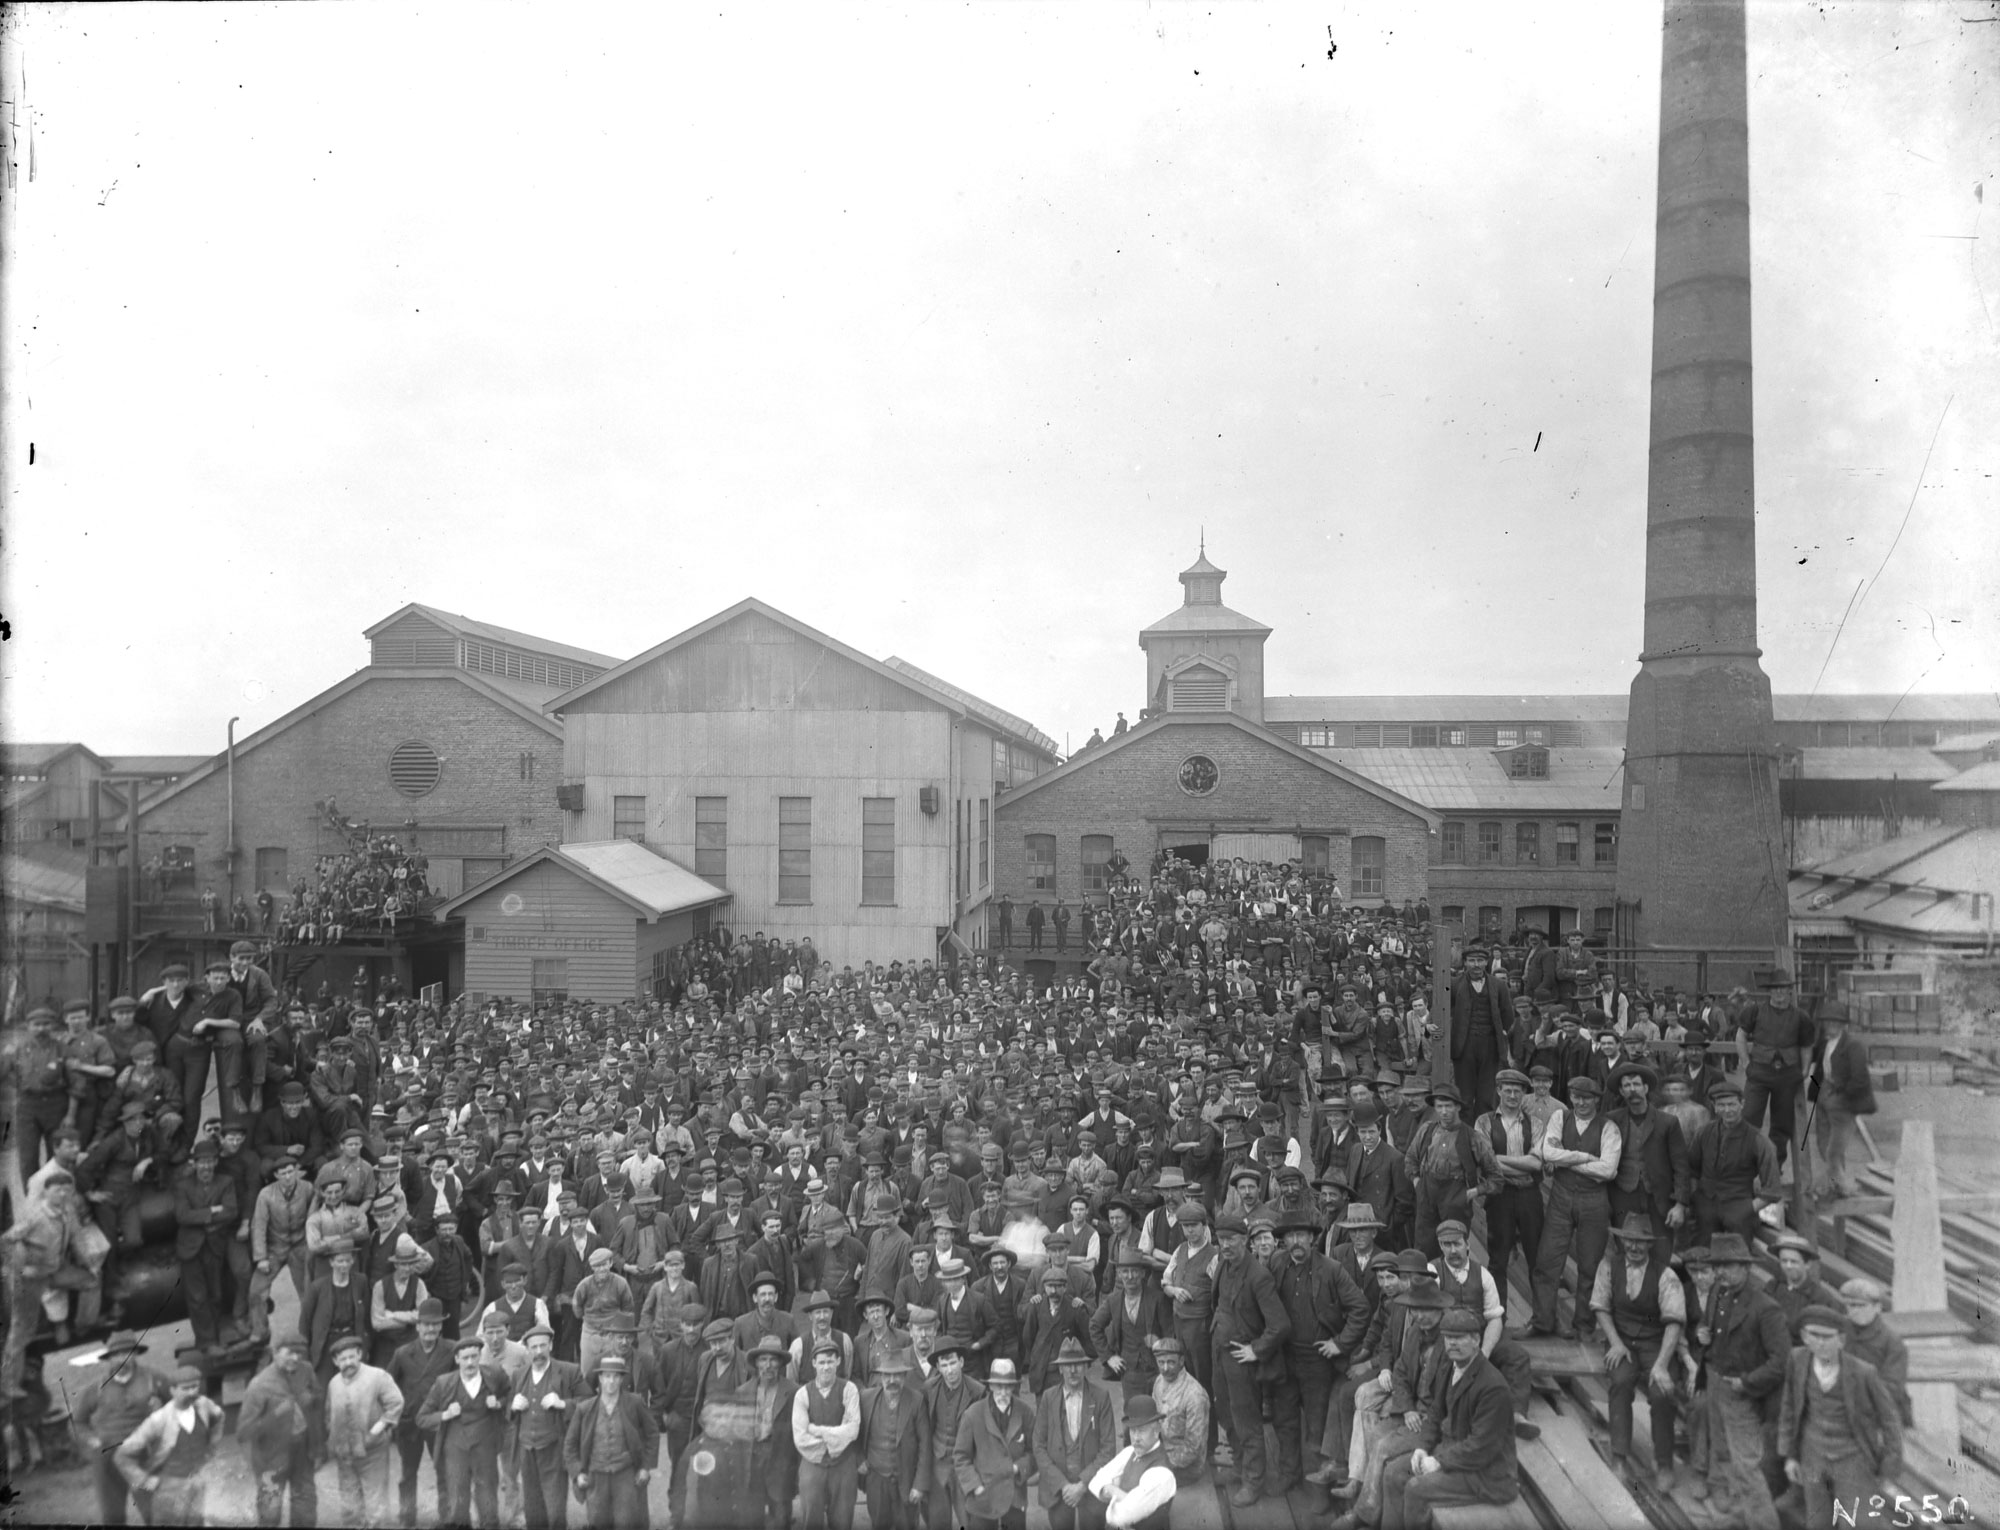 Workforce at Clyde Engineering Company, Granville, Sydney.